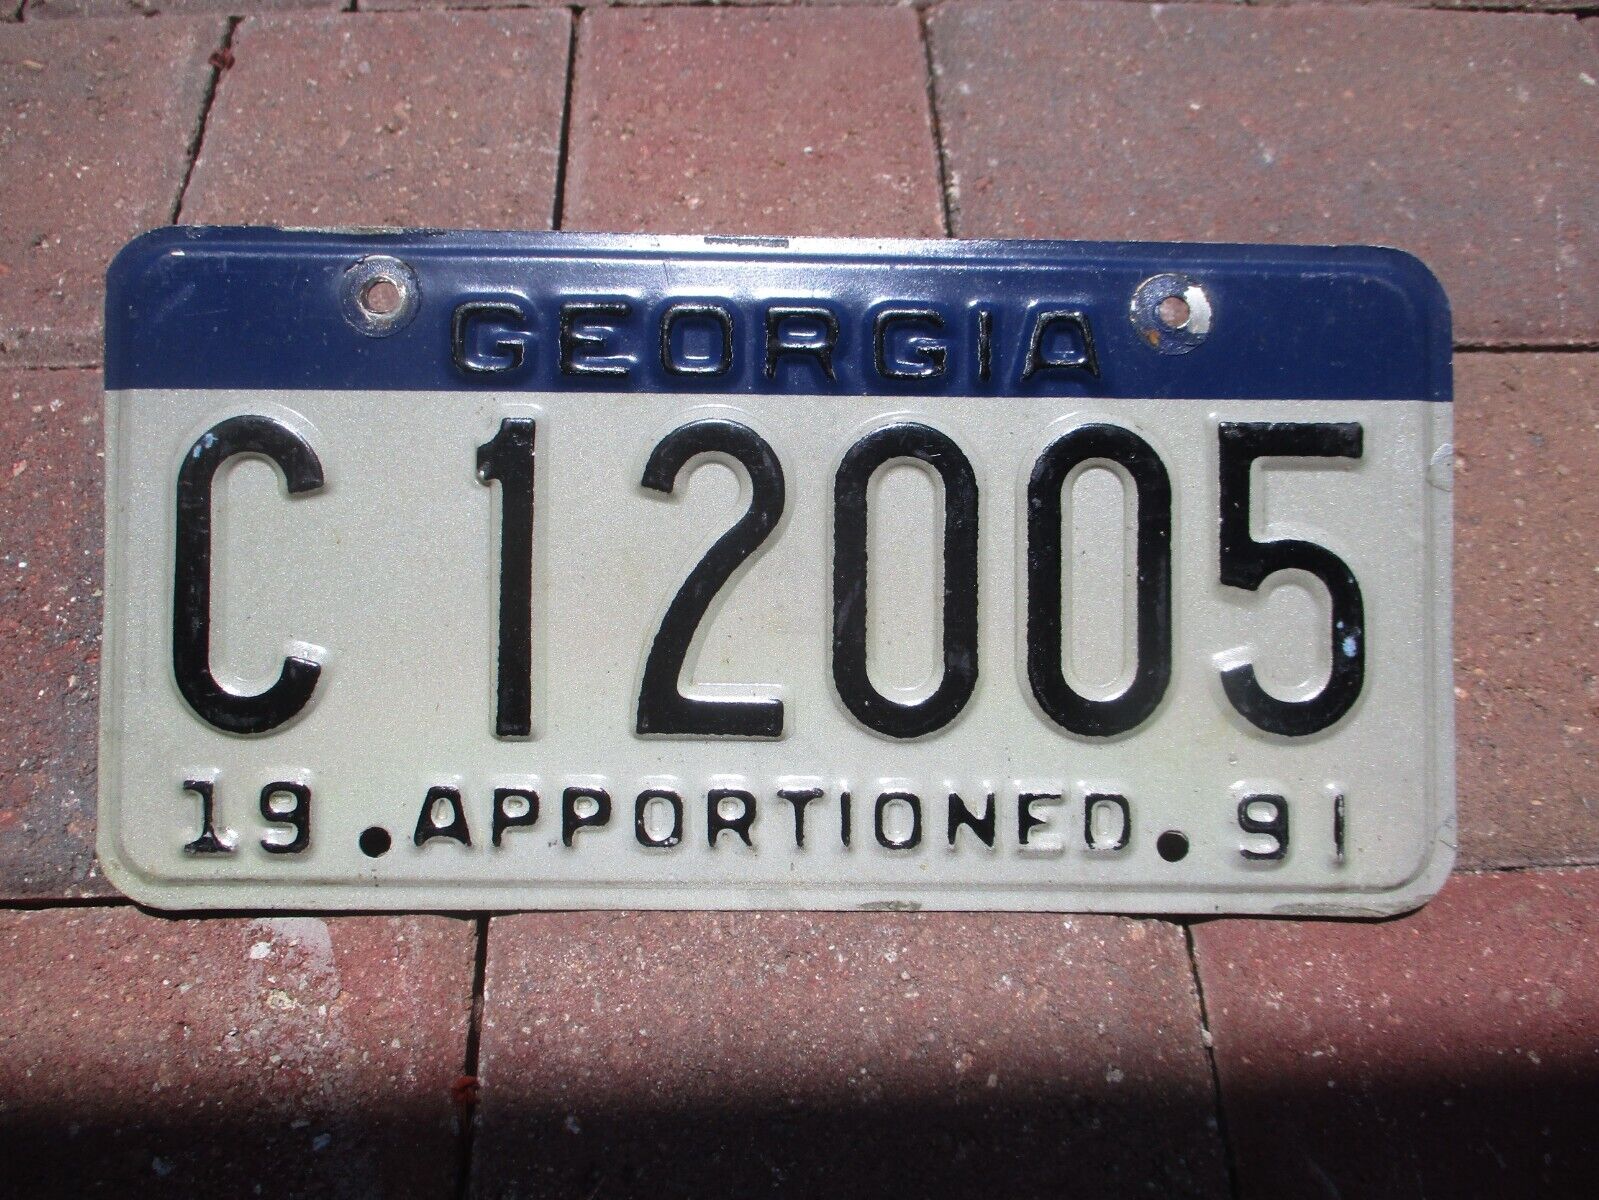 Georgia 1991   Apportioned  license plate  #  C 12005